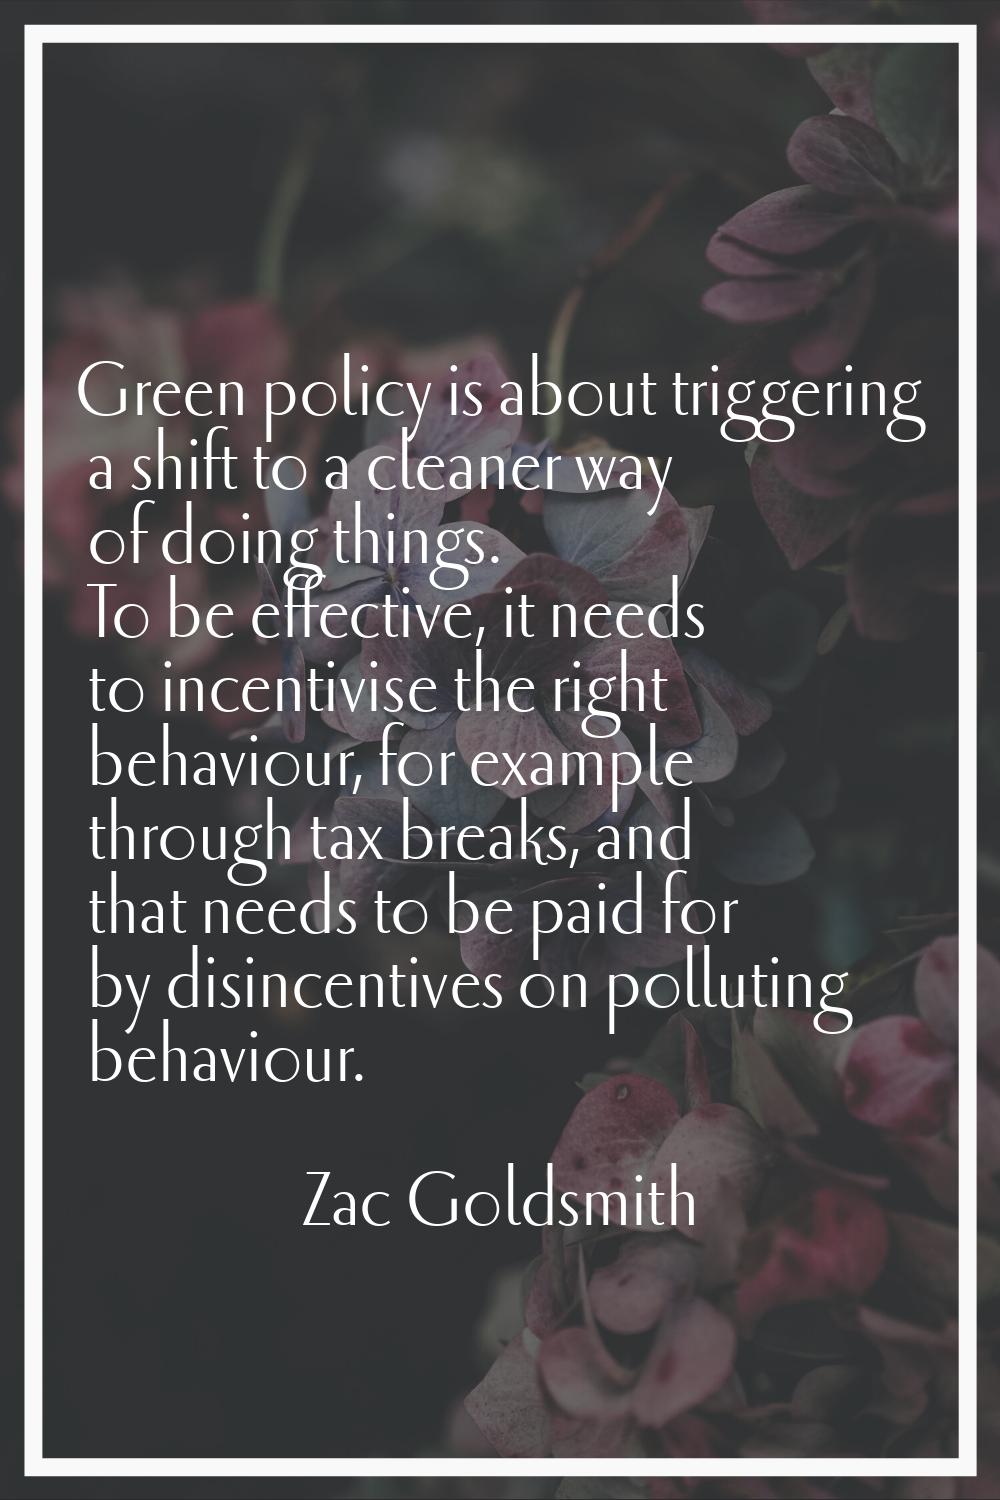 Green policy is about triggering a shift to a cleaner way of doing things. To be effective, it need